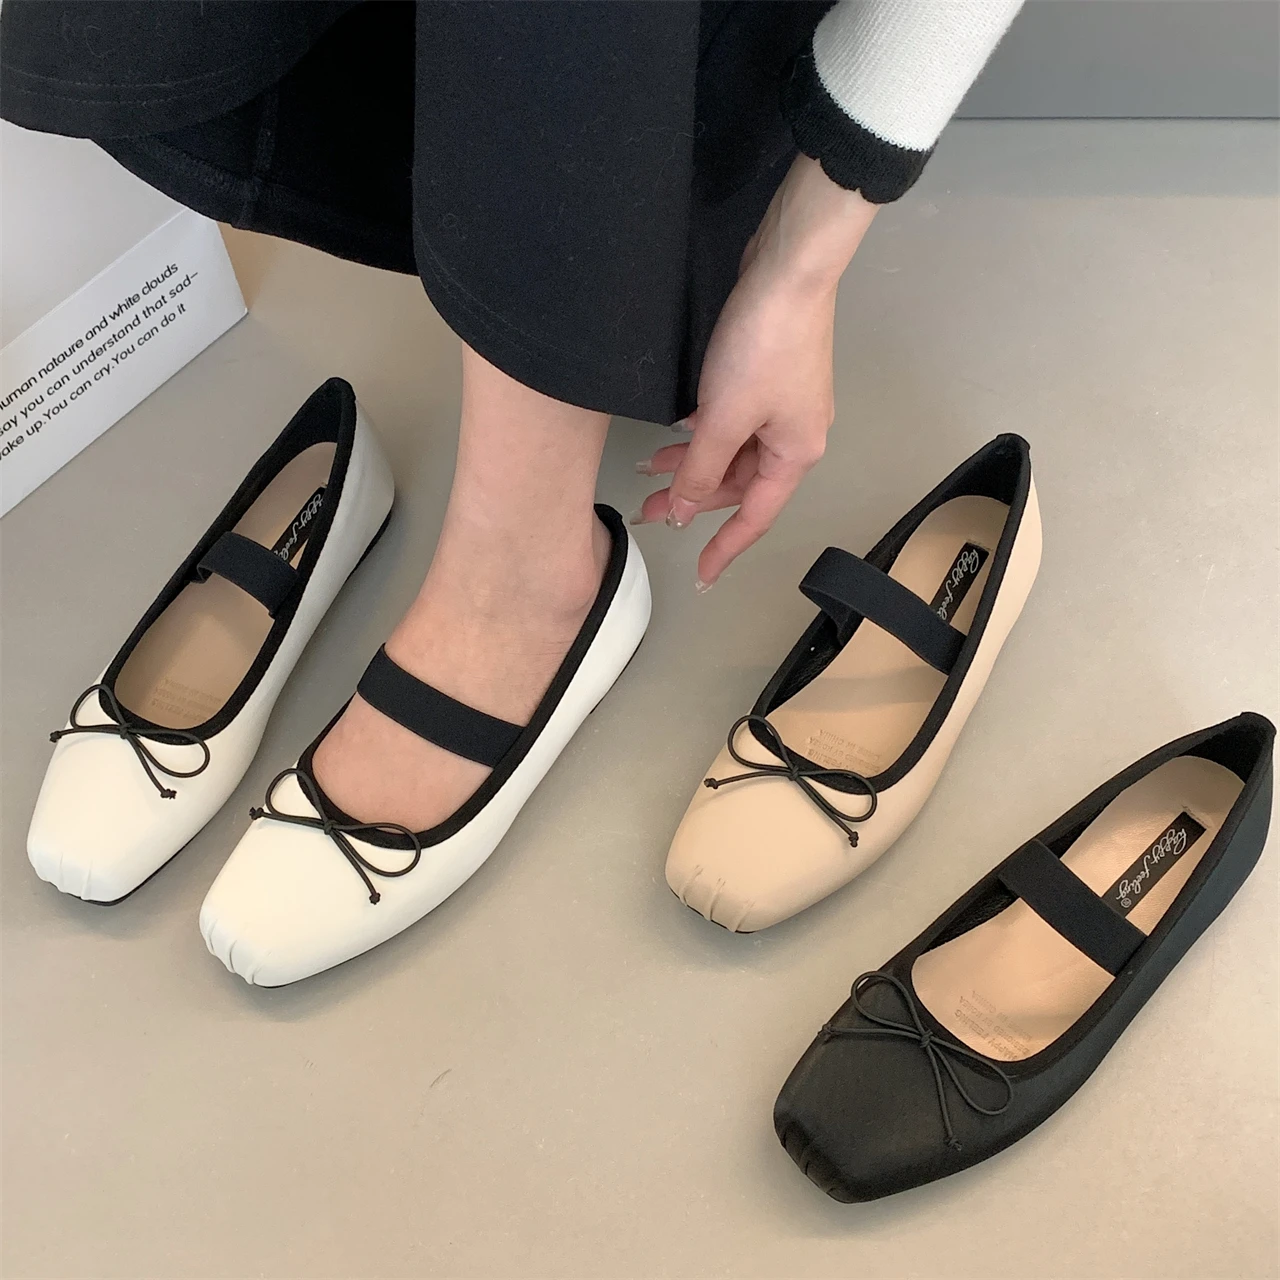 

Women Flats French Gentle Shoes Round Toe Bow Shallow Mouth Ballet Shoes Slip On Mary Jane sandals Comfortable Soft Loa